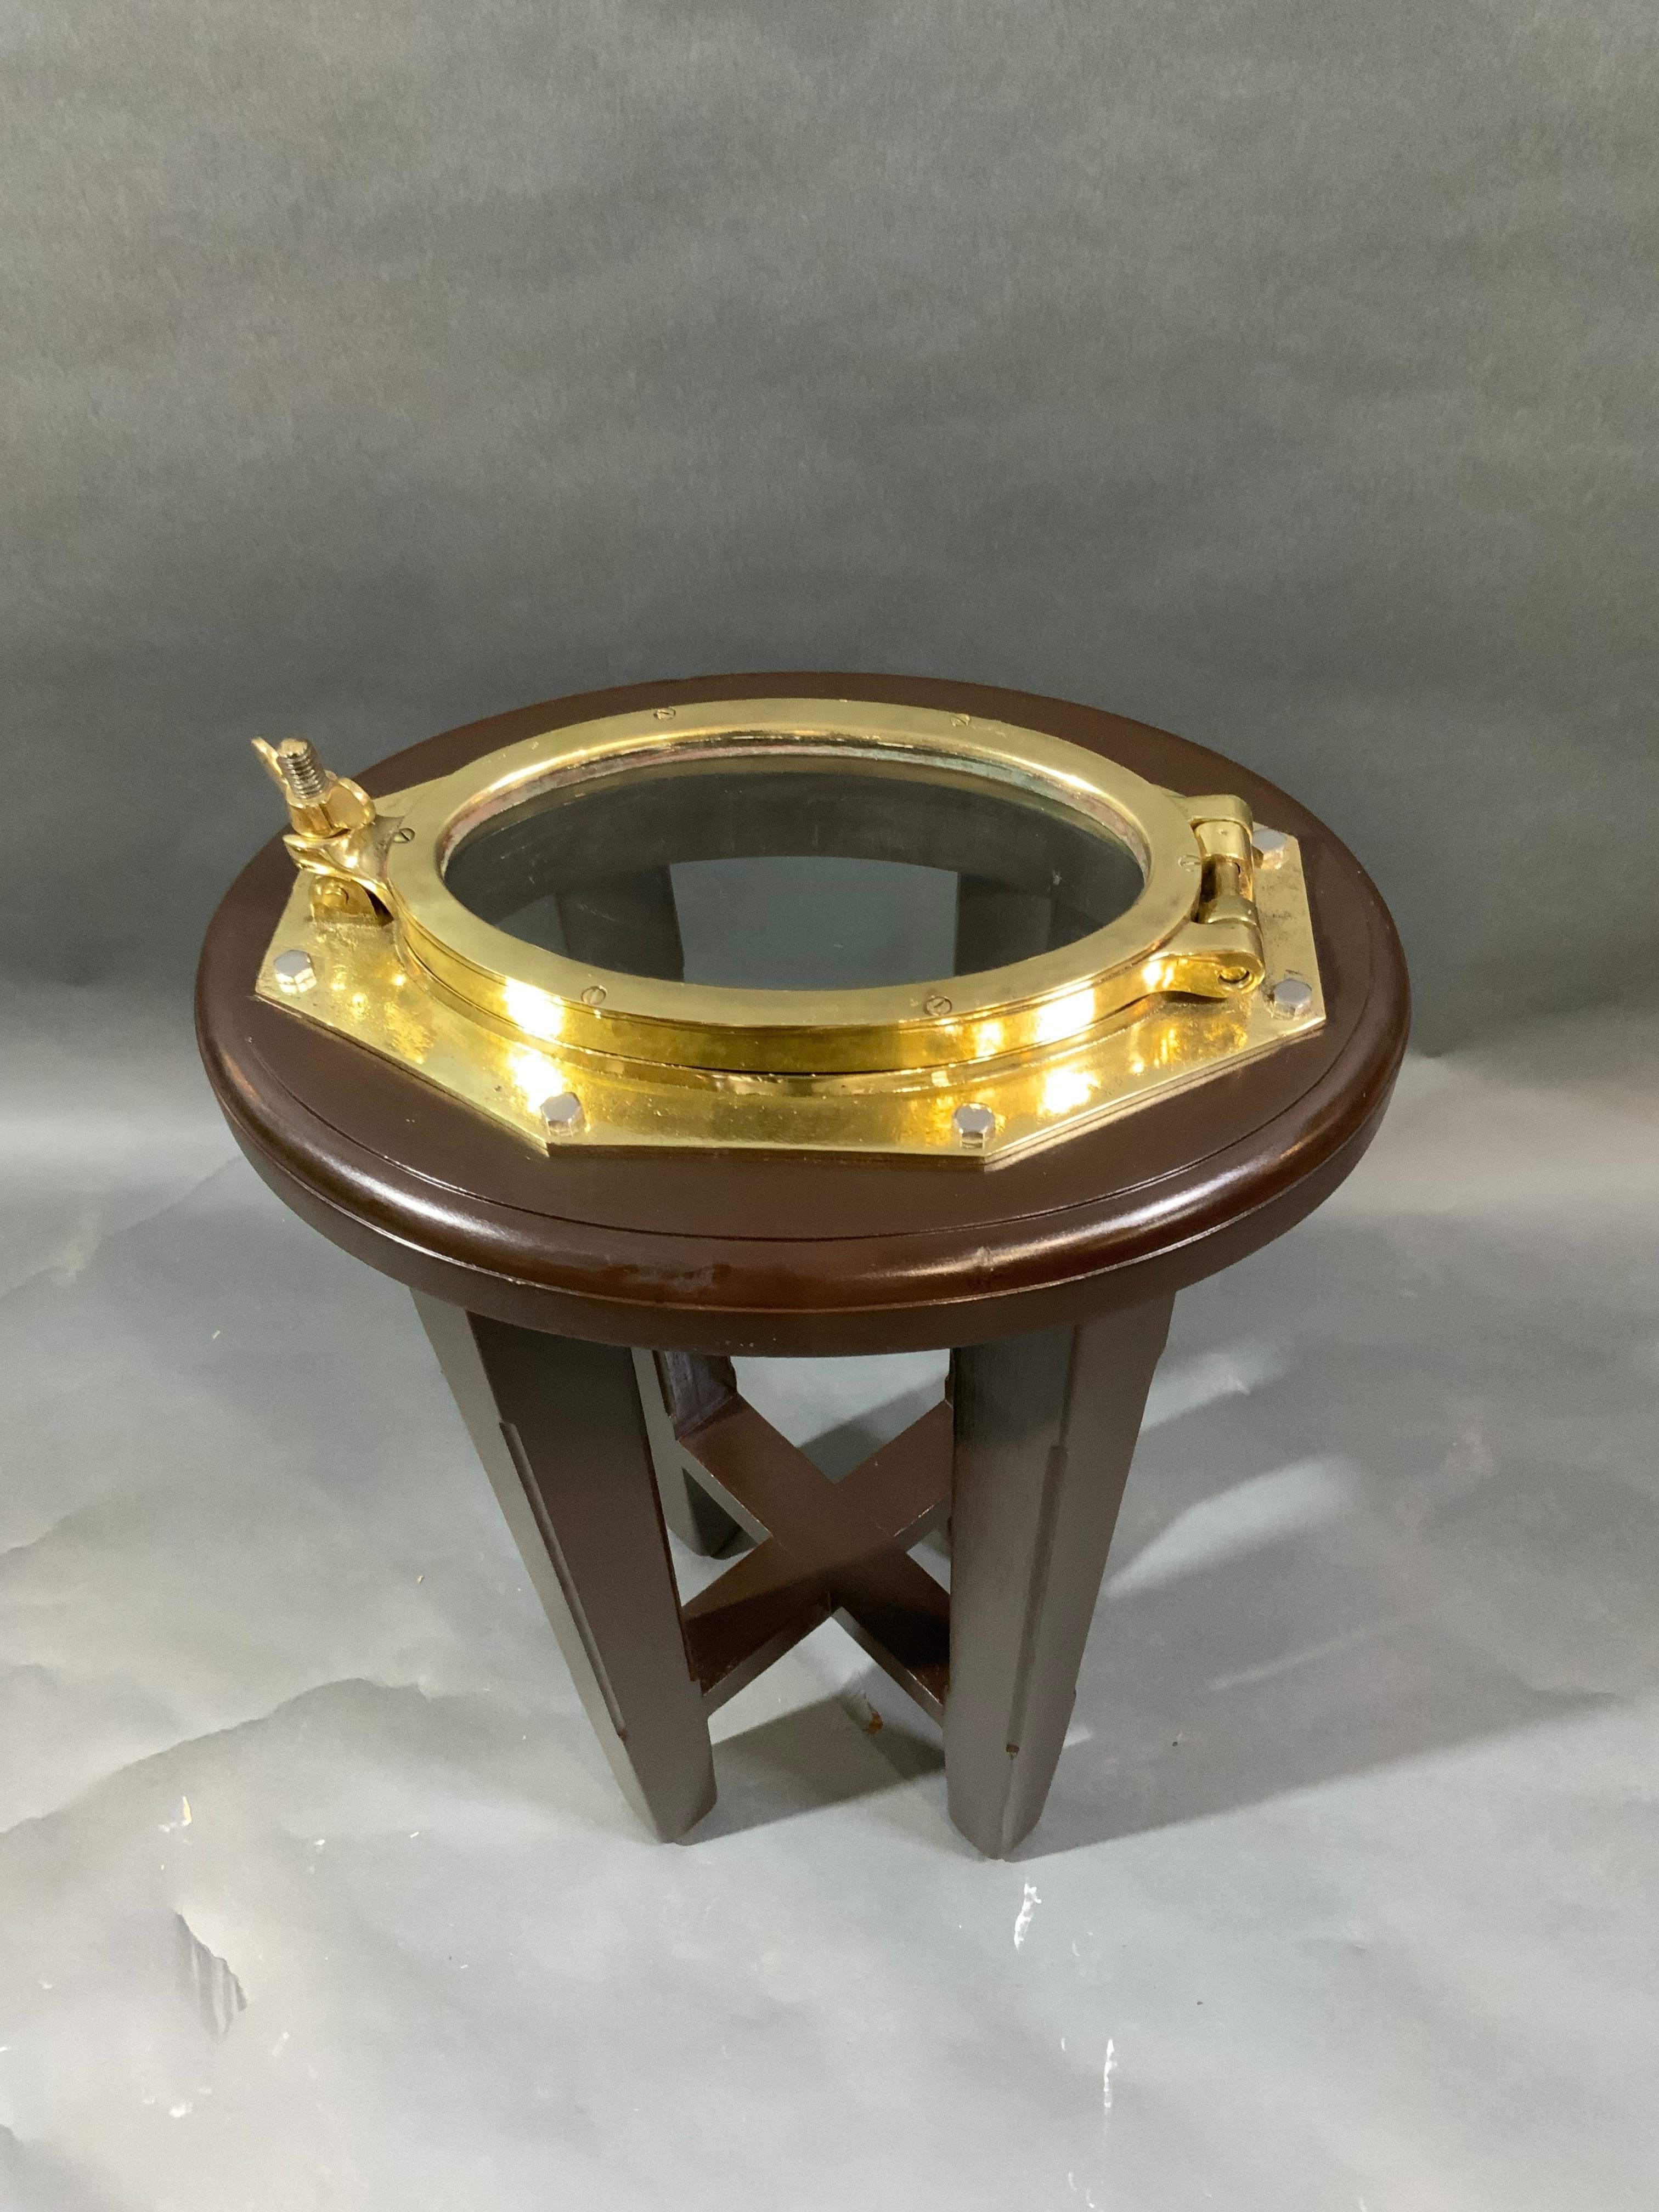 Solid brass highly polished and lacquered yacht or boat porthole fitted to a mahogany side table. This has been meticulously polished and lacquered and this is a great old relic. Weight is 14 pounds. Dimensions are 24 tall with a 15 by 11 inch top.